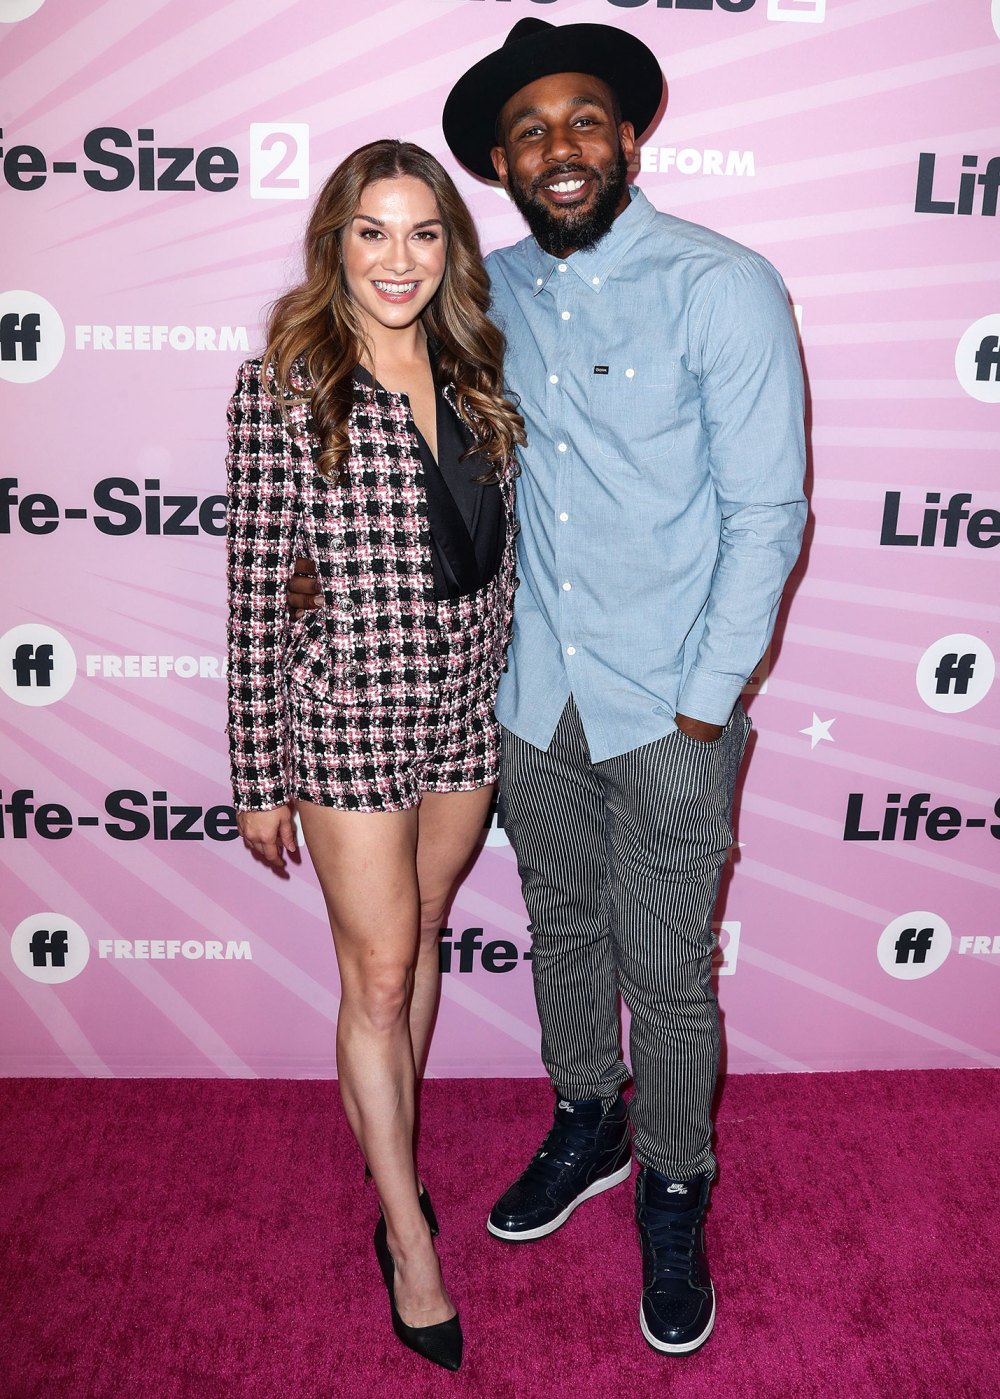 Stephen tWitch Boss and Allison Holker Working on a Home Renovation Show Before Death